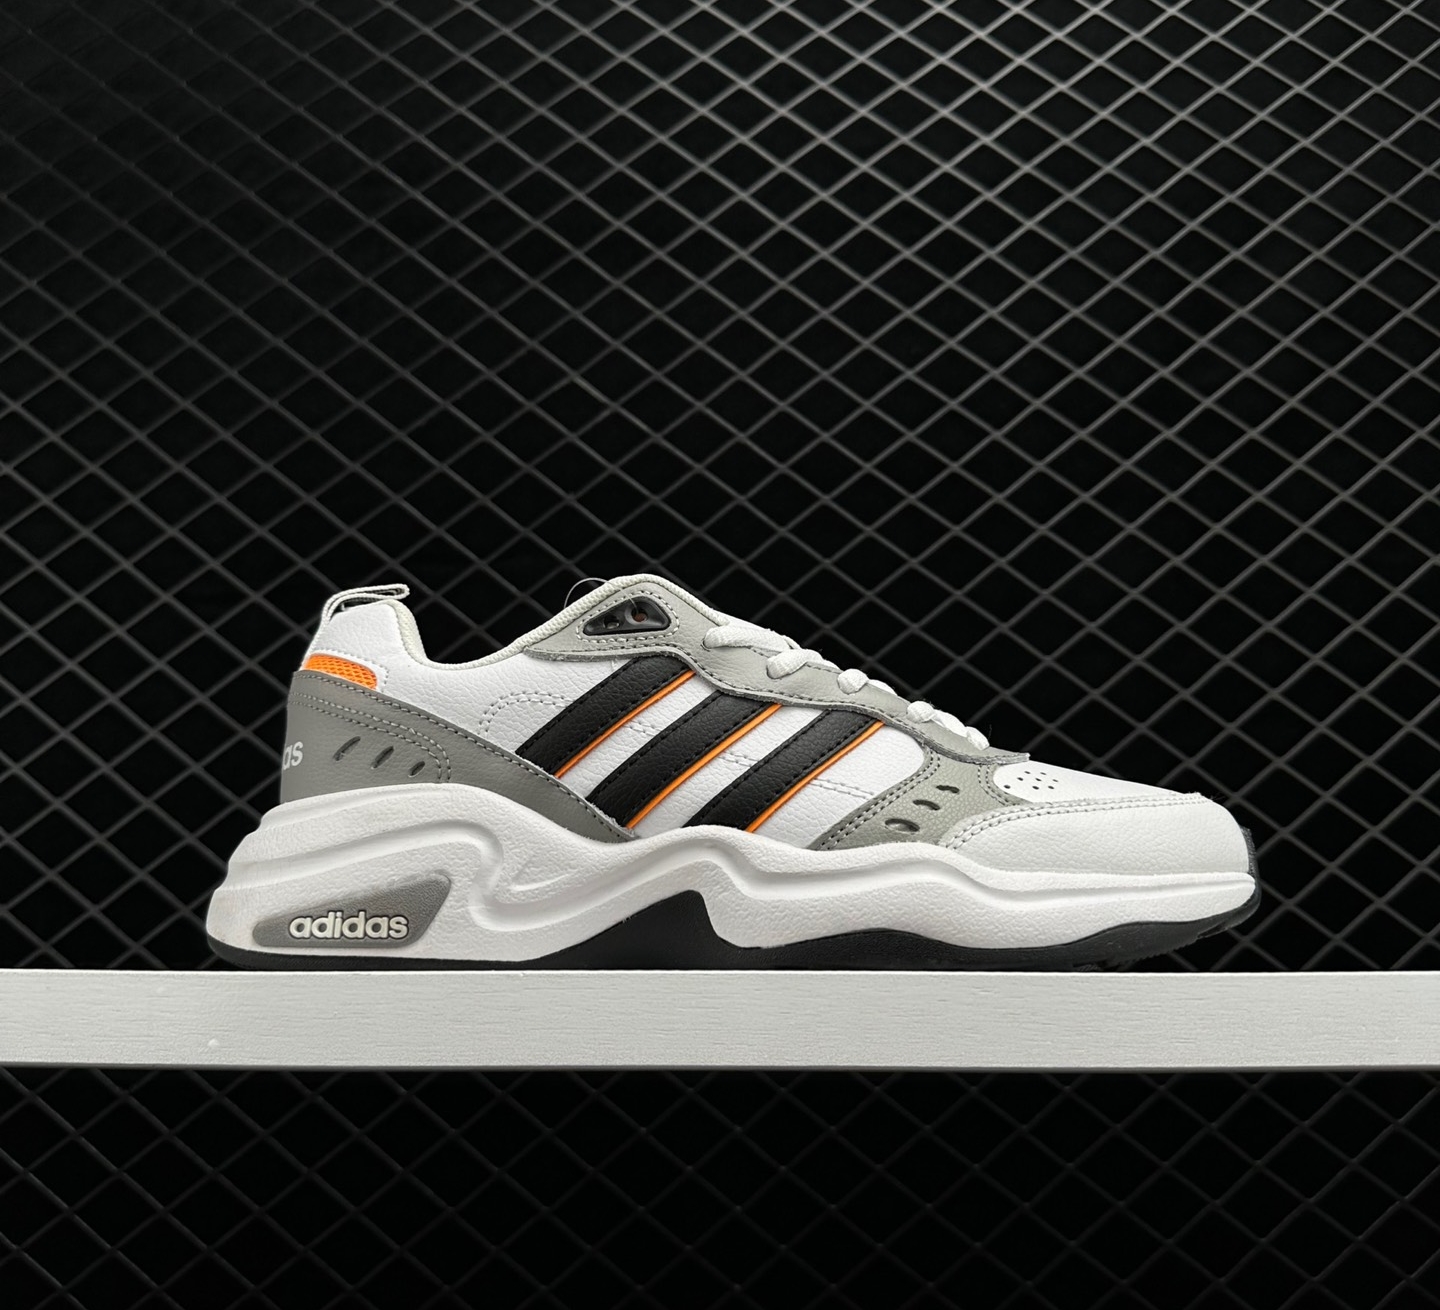 Adidas neo Strutter 'Grey' GX0670 - Fashionable and Comfortable Sneakers